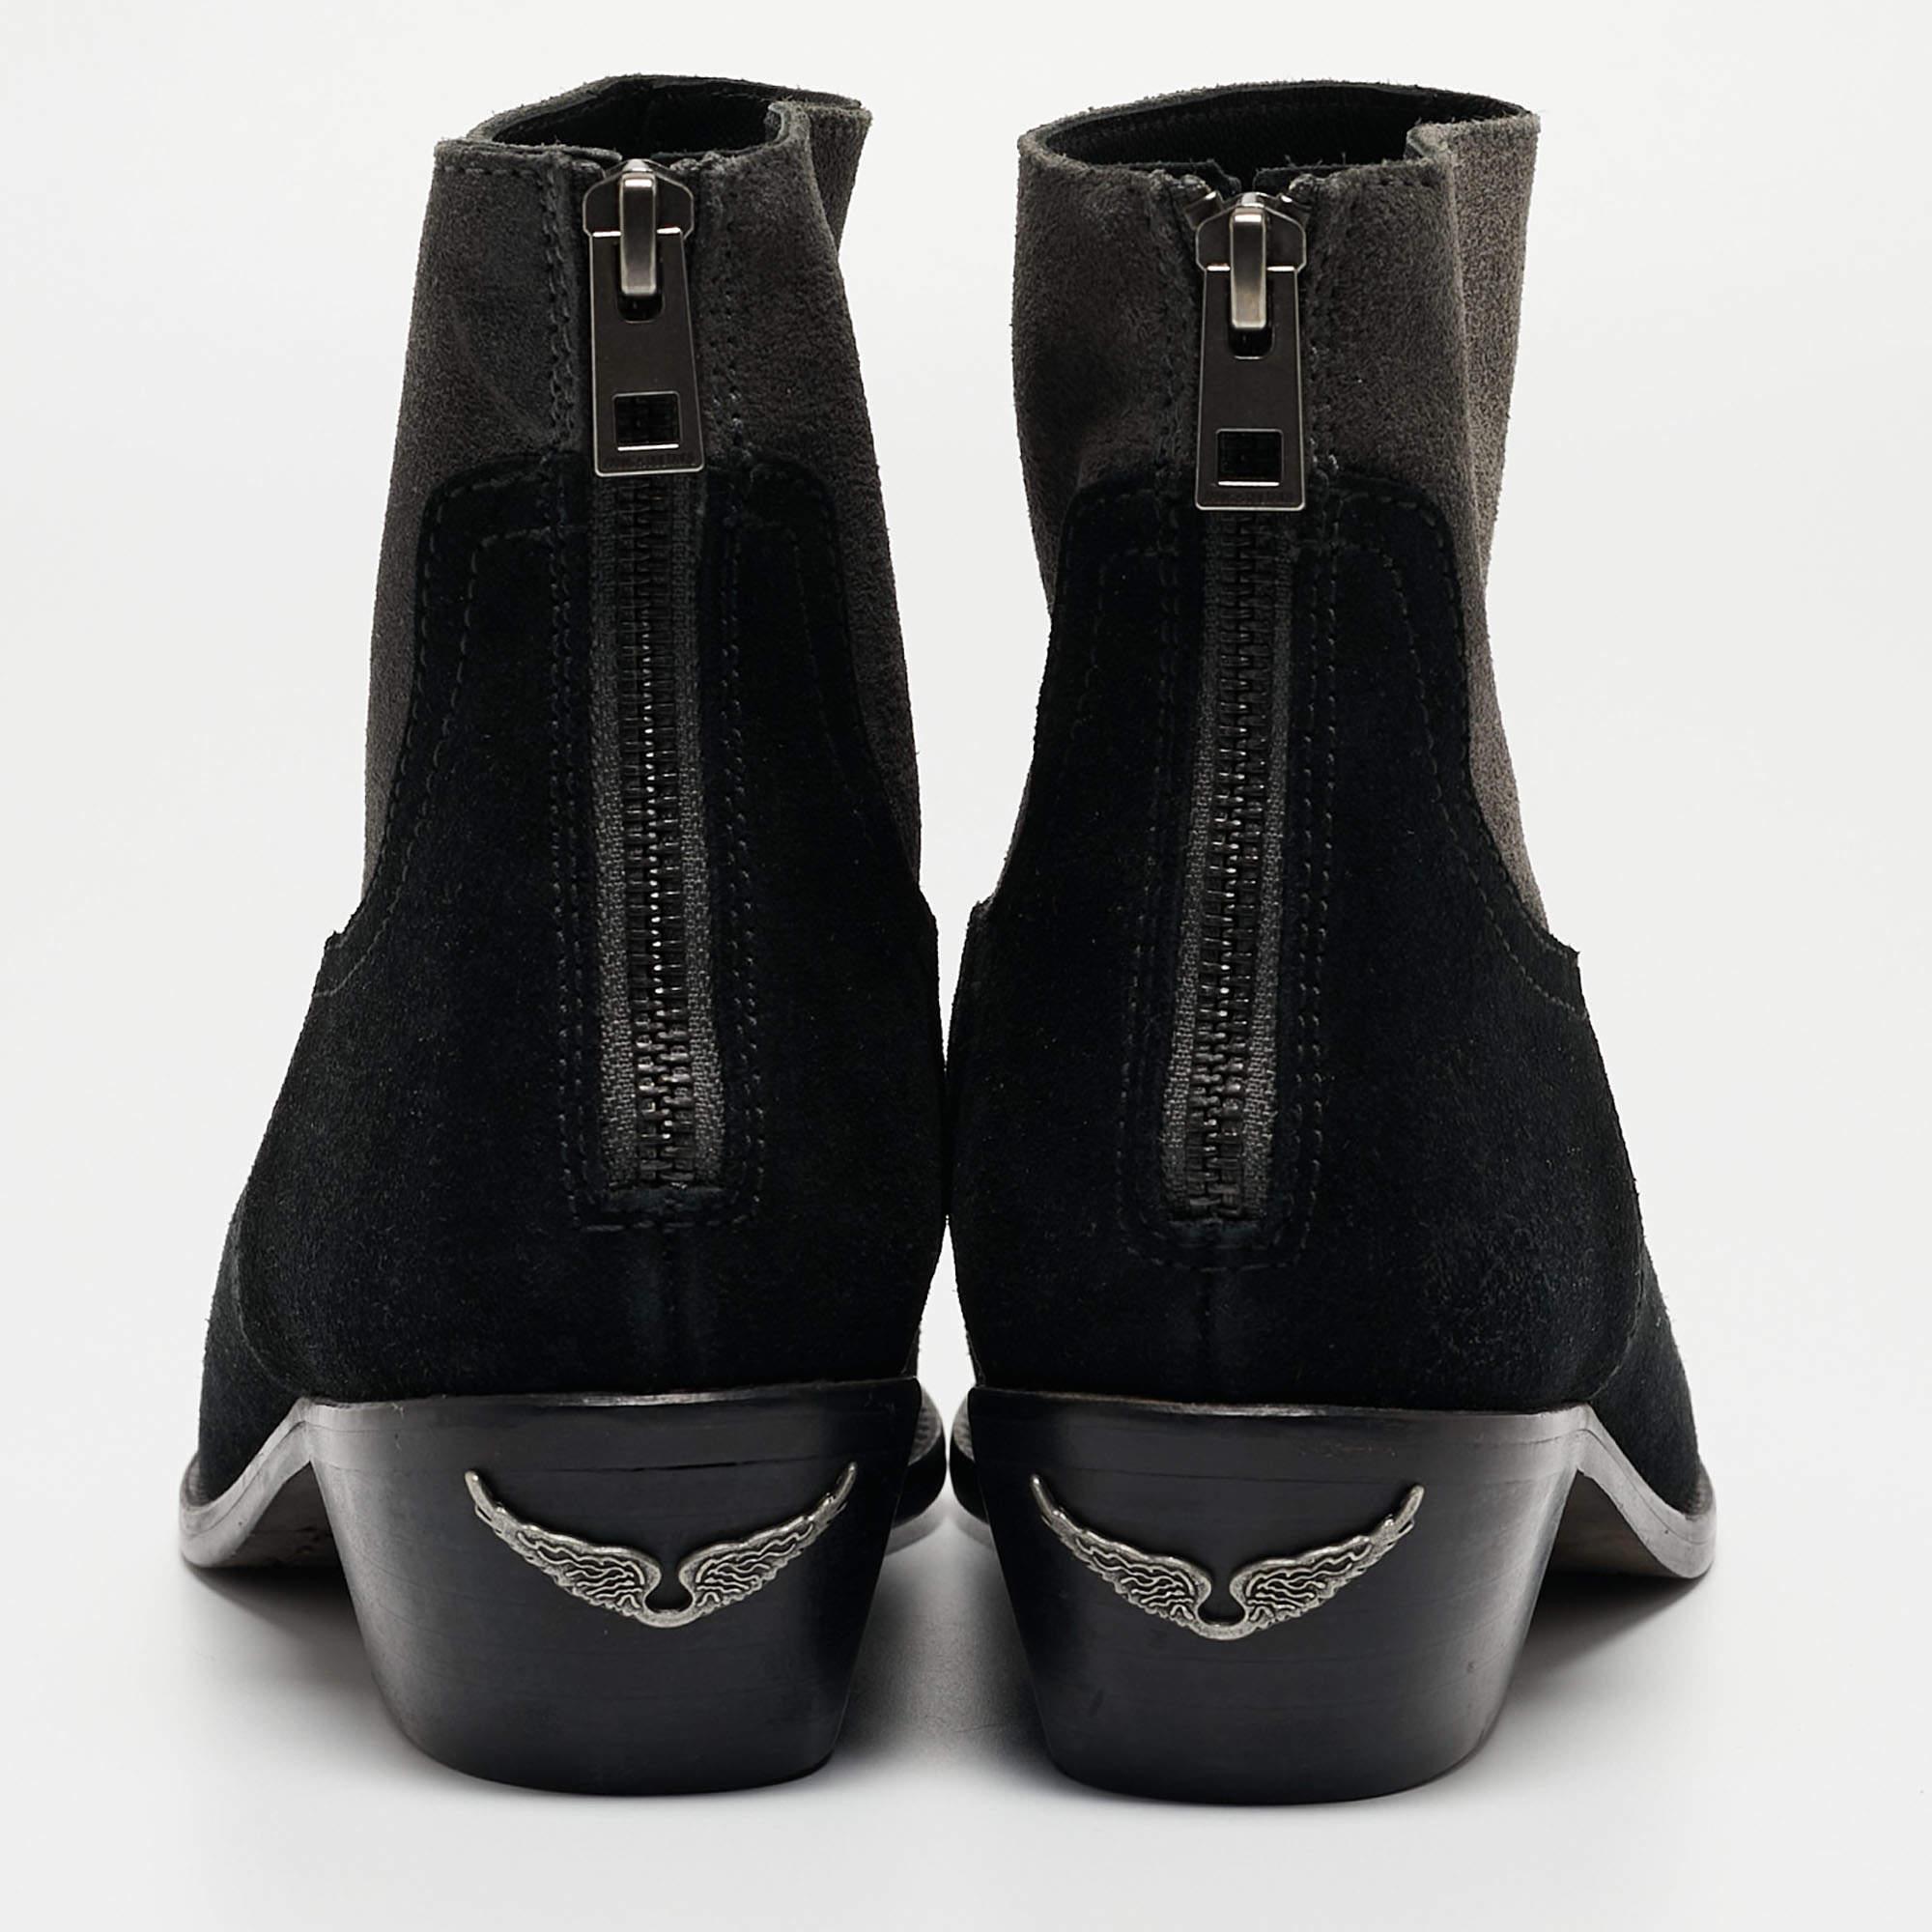 Zadig & Voltaire Black/Grey Suede Teddy Ankle Boots Size 37 For Sale 2